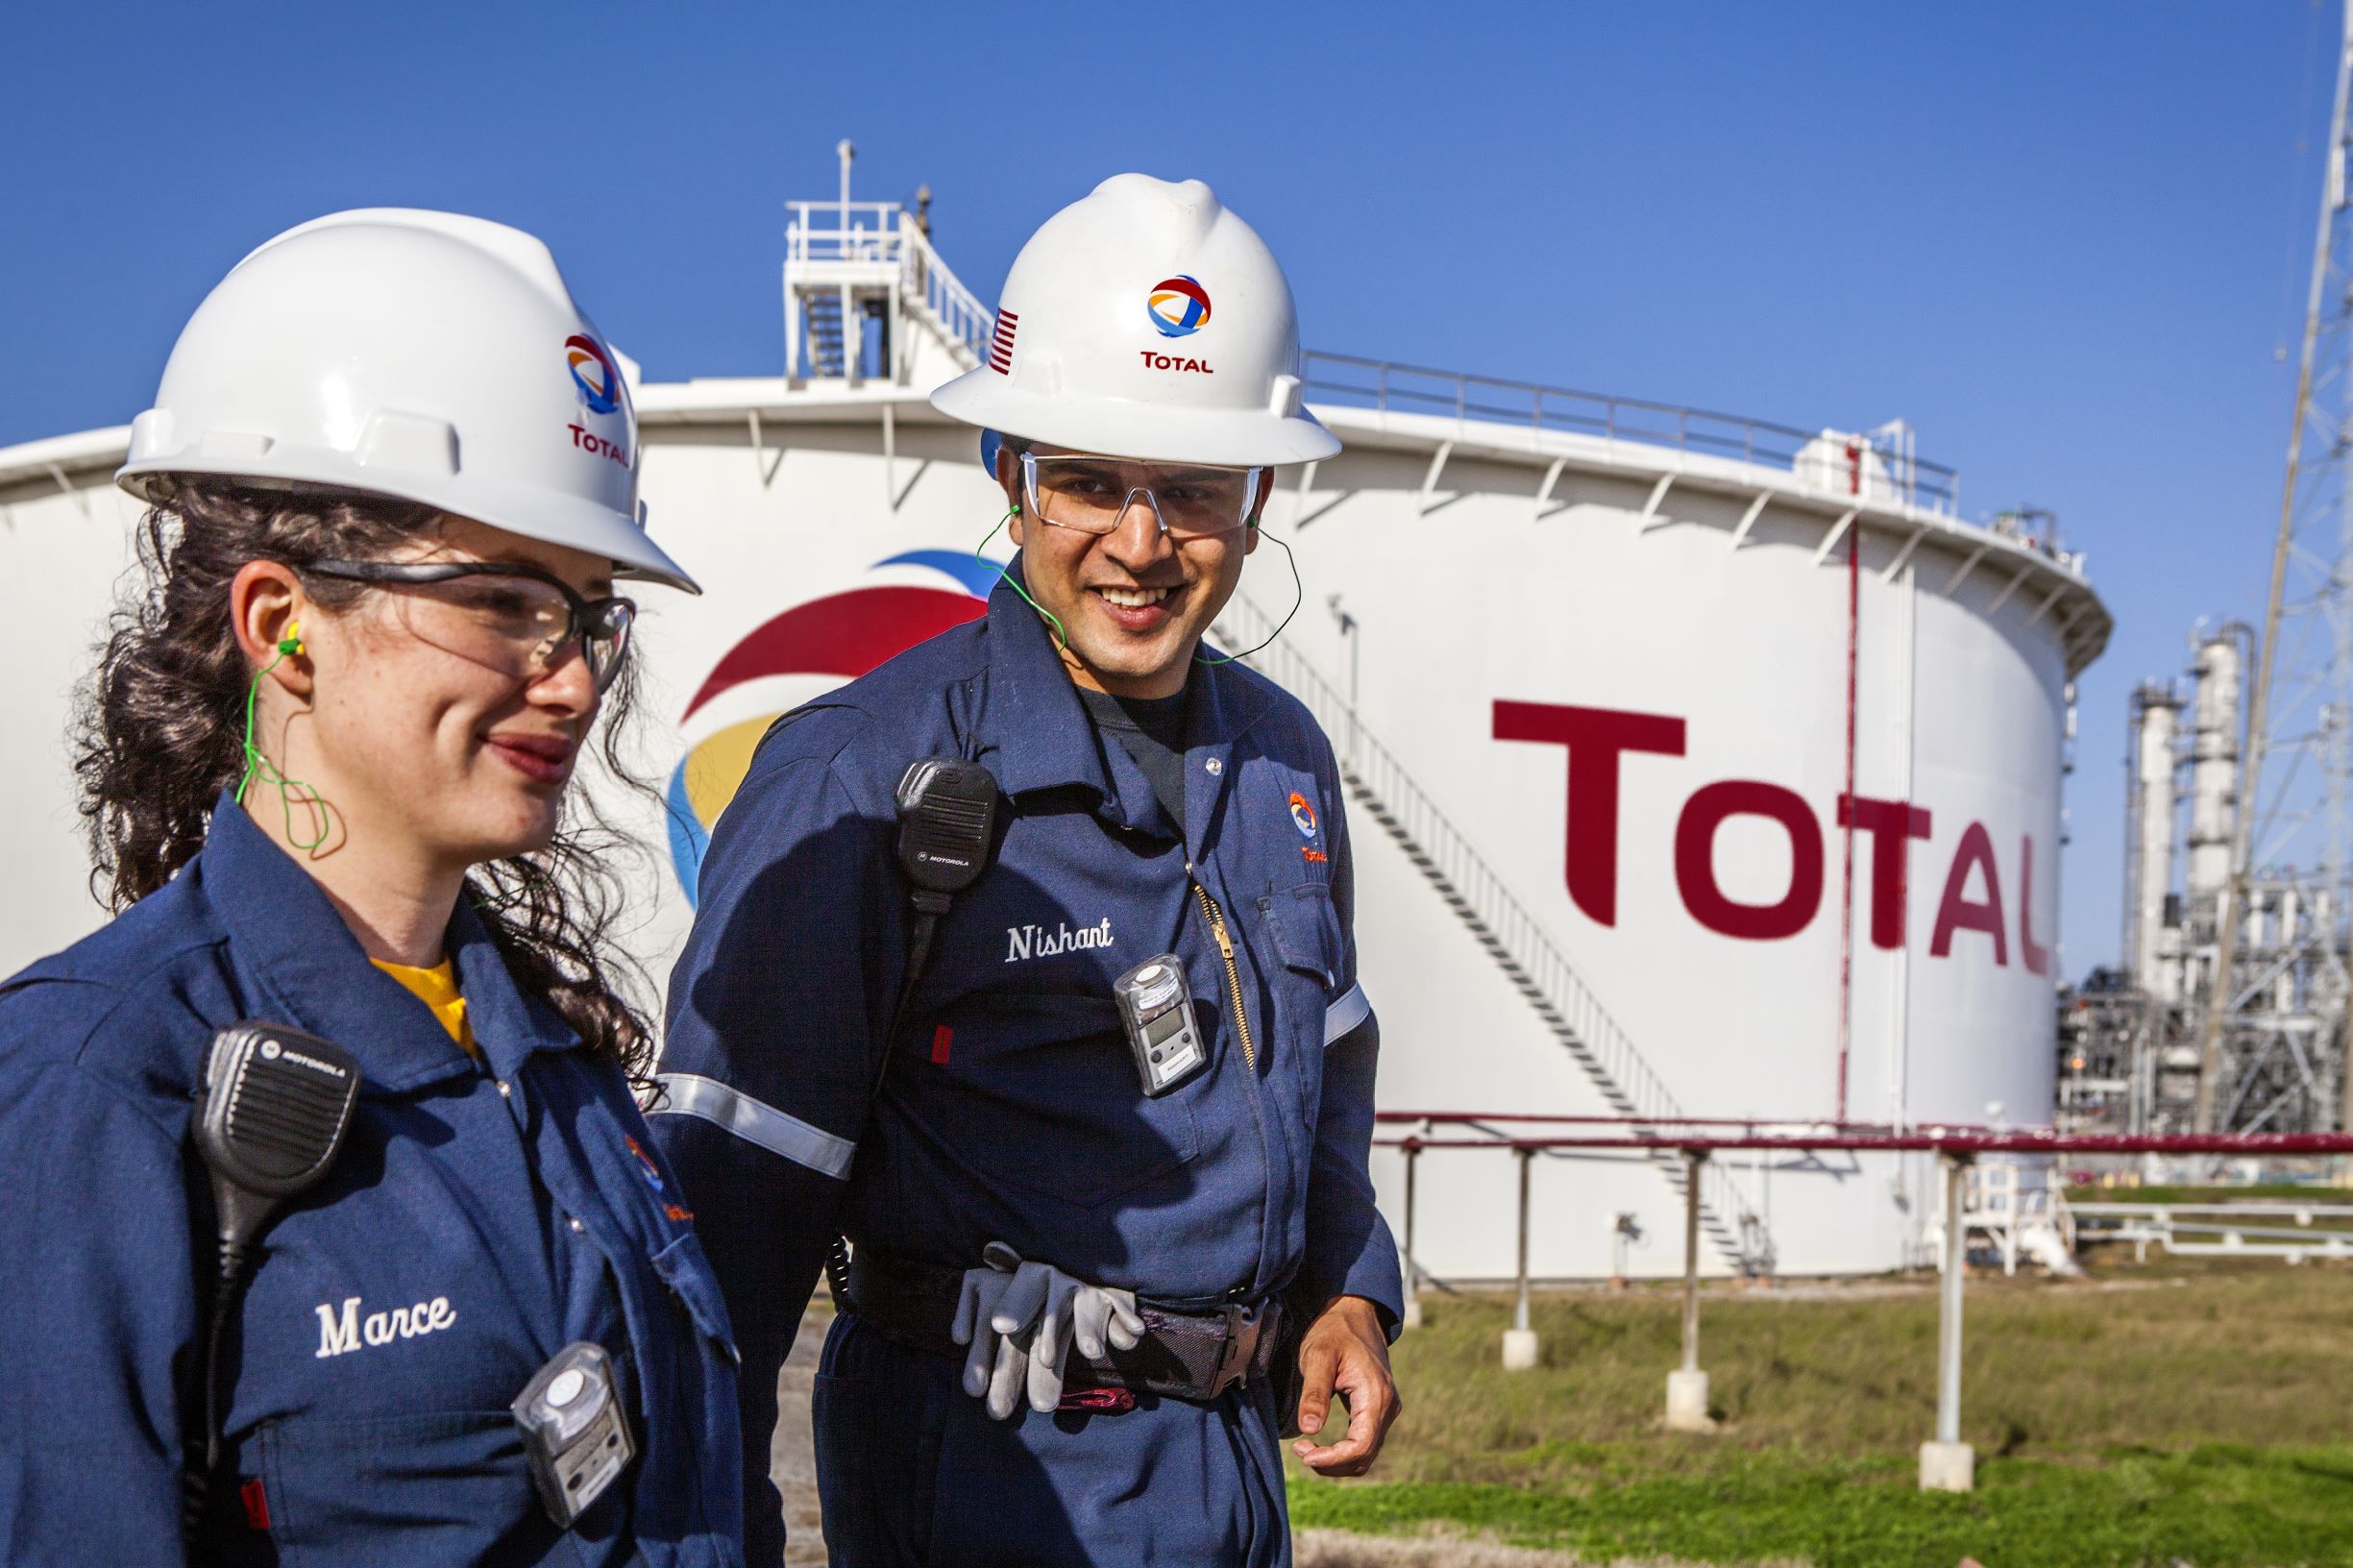 Total: shareholders’ meeting on energy transition and carbon neutrality